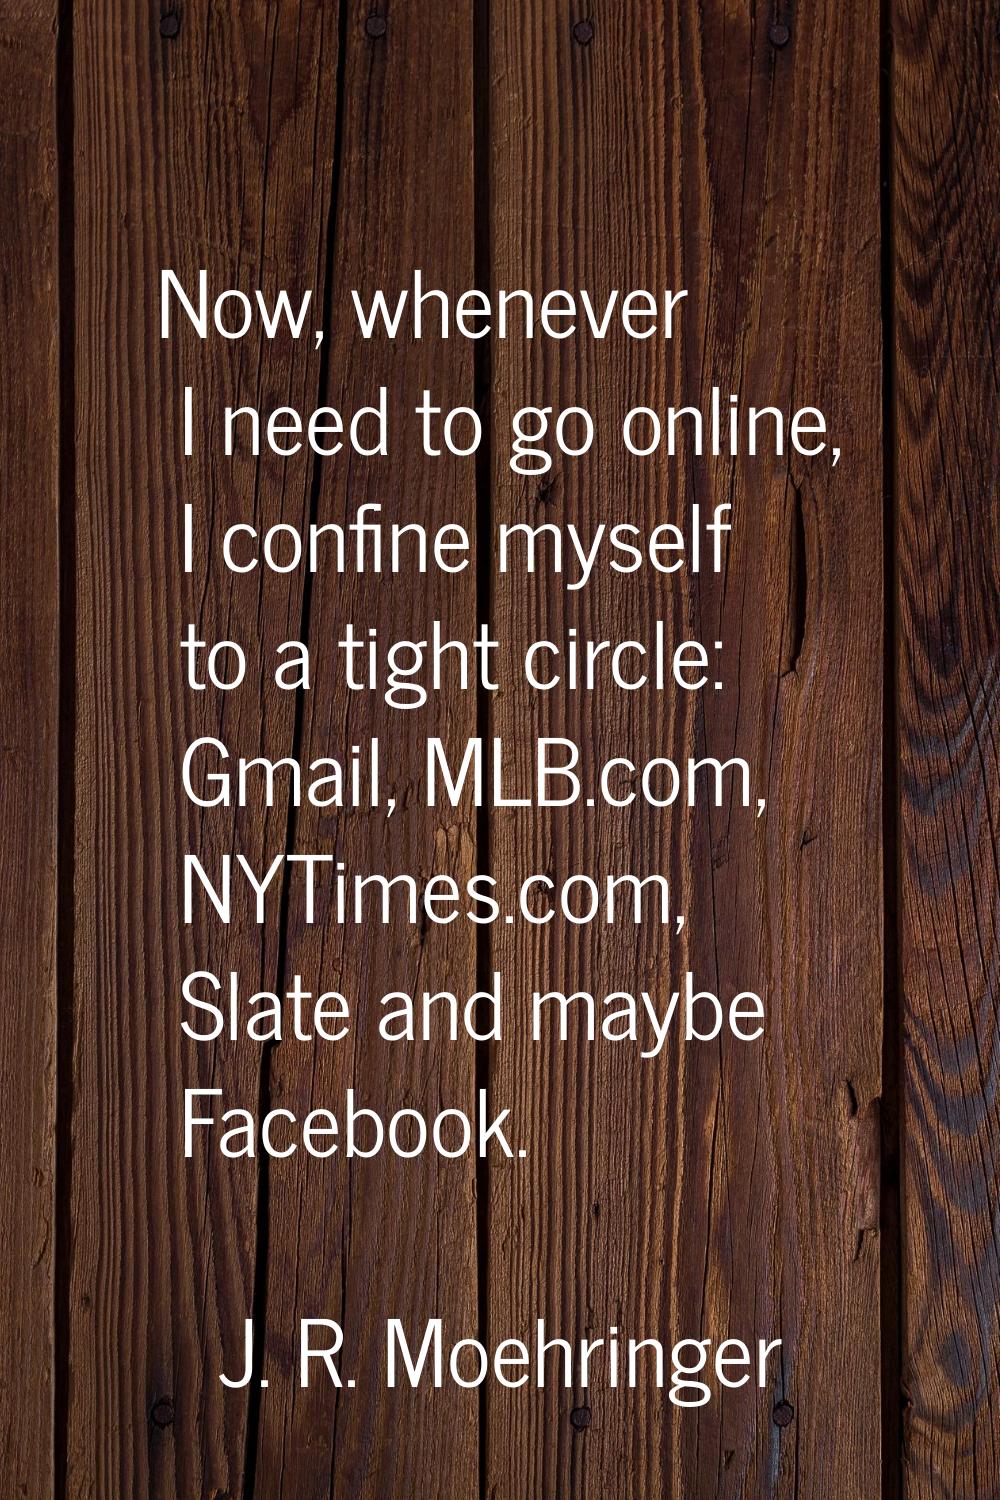 Now, whenever I need to go online, I confine myself to a tight circle: Gmail, MLB.com, NYTimes.com,